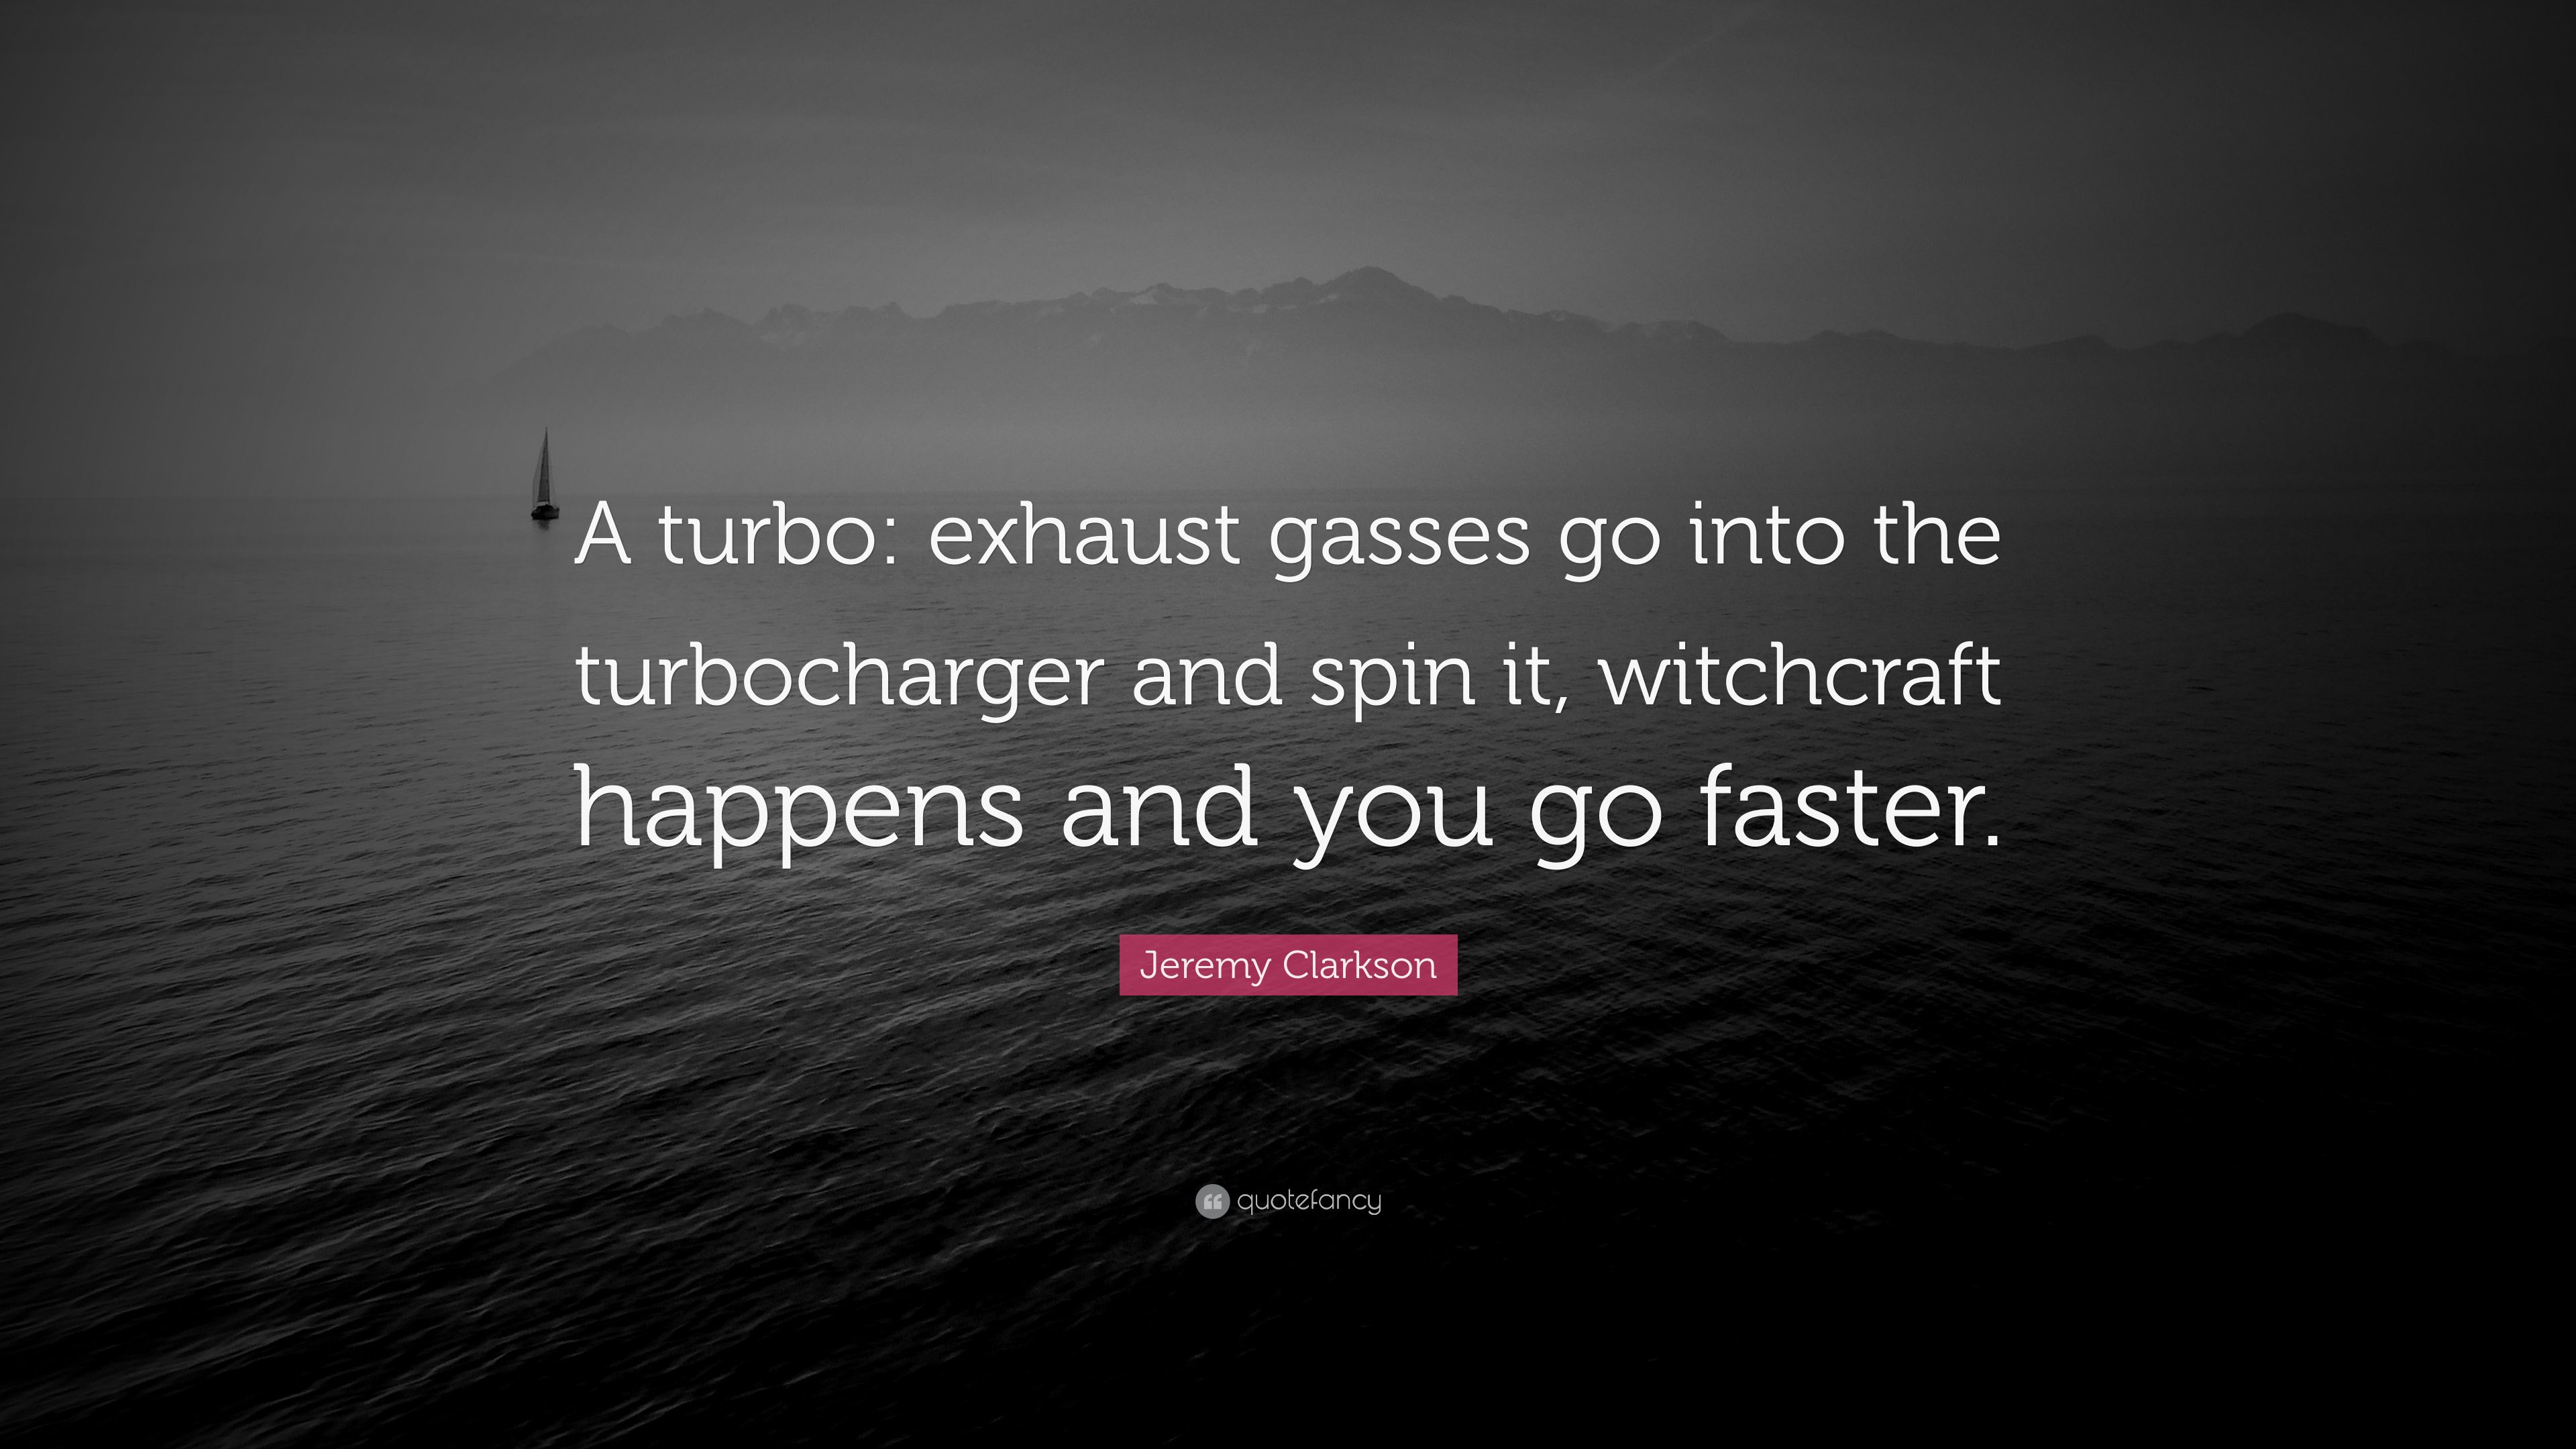 Jeremy Clarkson Quote: “A turbo: exhaust gasses go into the turbocharger and spin it, witchcraft happens and you go faster.” (7 wallpaper)